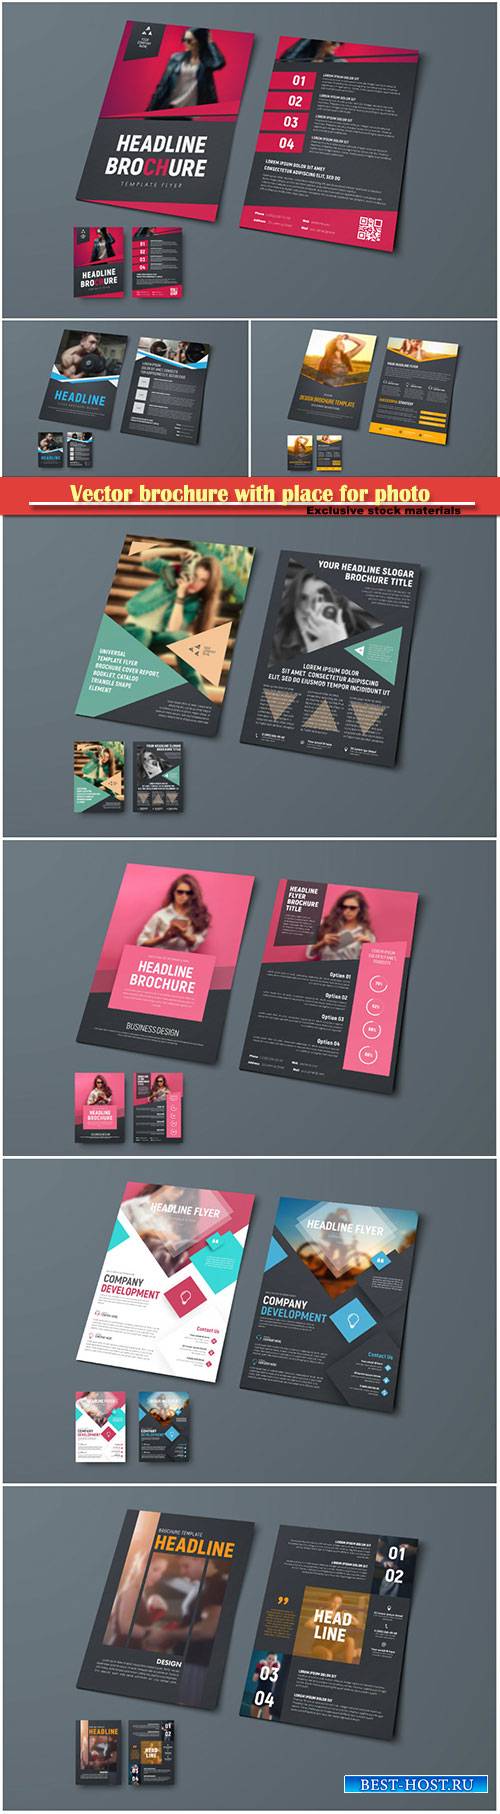 Vector template of brochure with place for photo, design flyer for business, advertising and printing